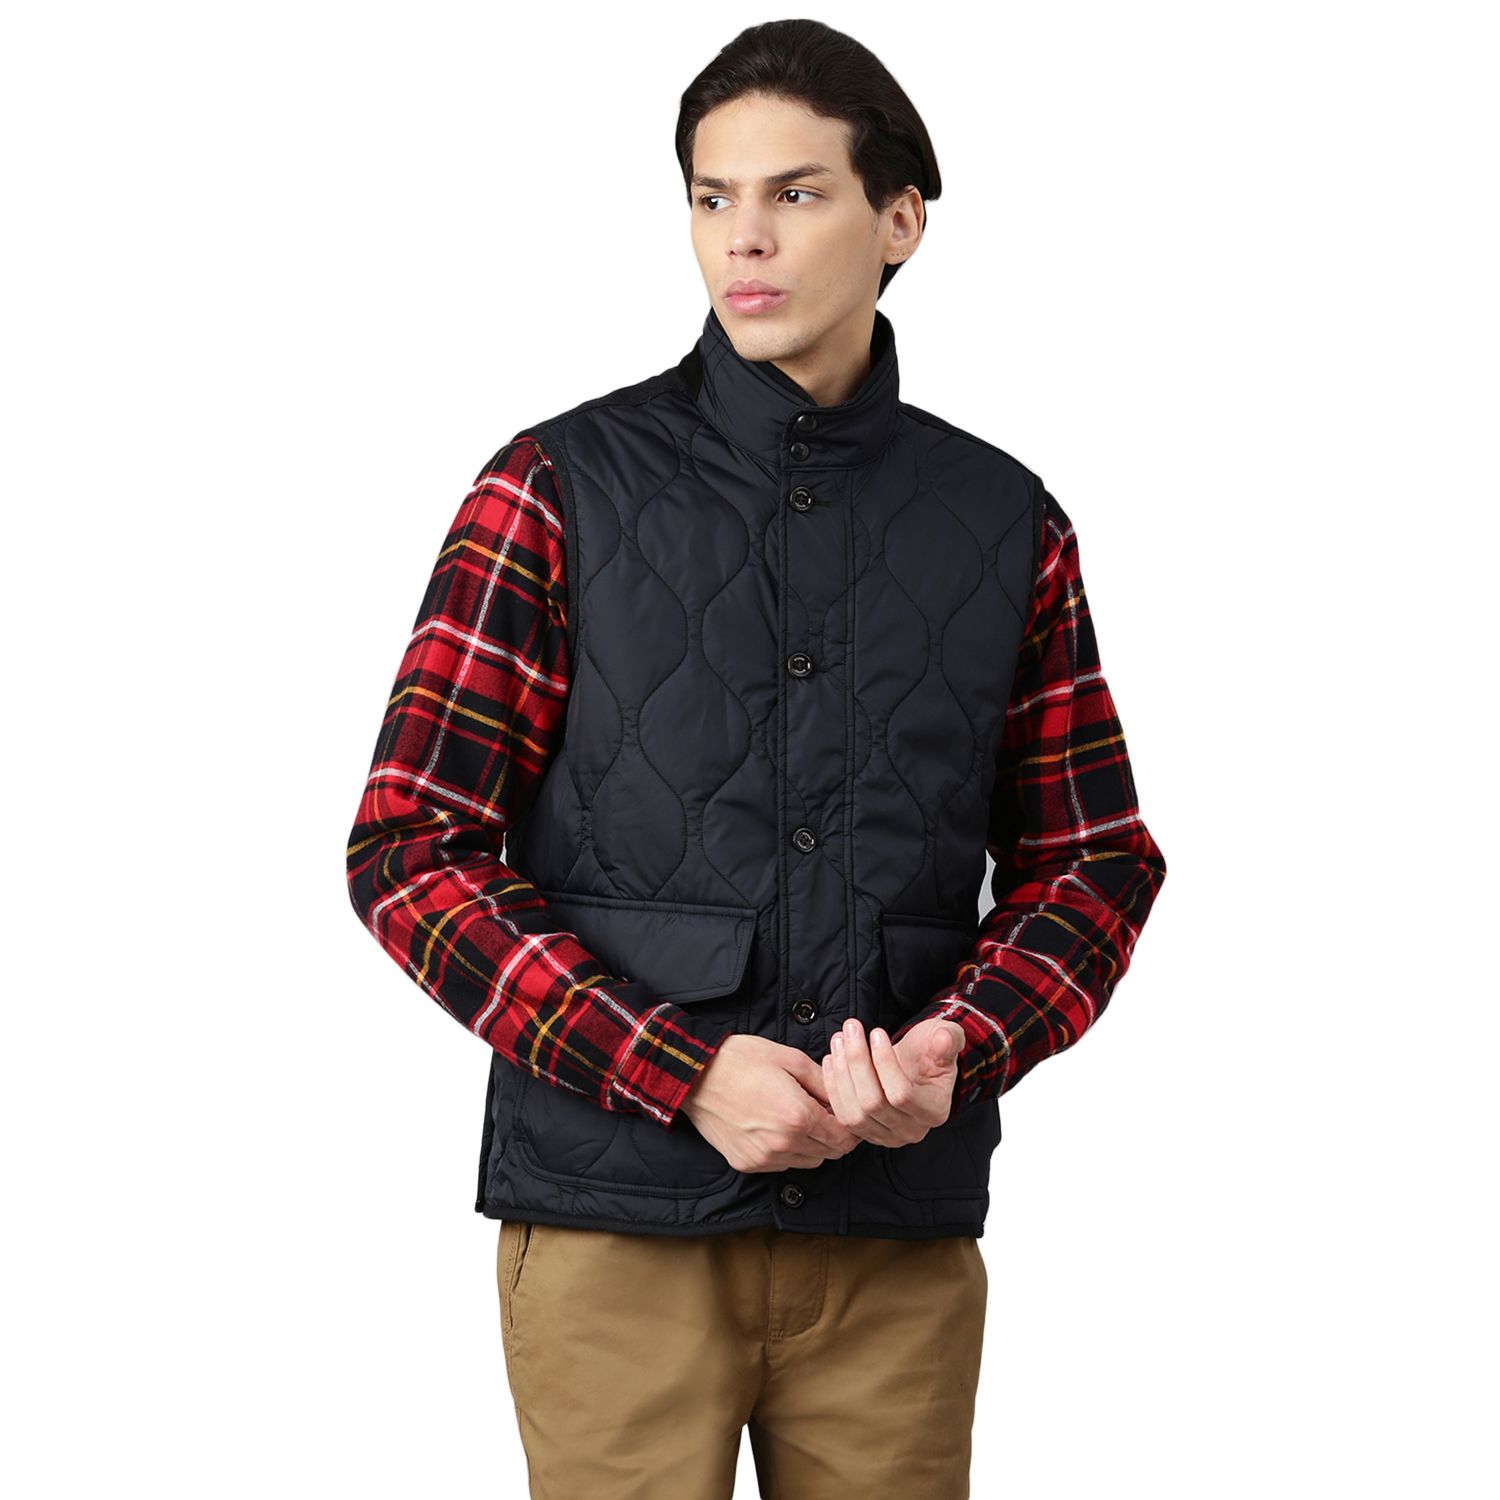 Buy Woodland Royal Blue Sleeveless Quilted Jacket for Men Online @ Tata CLiQ